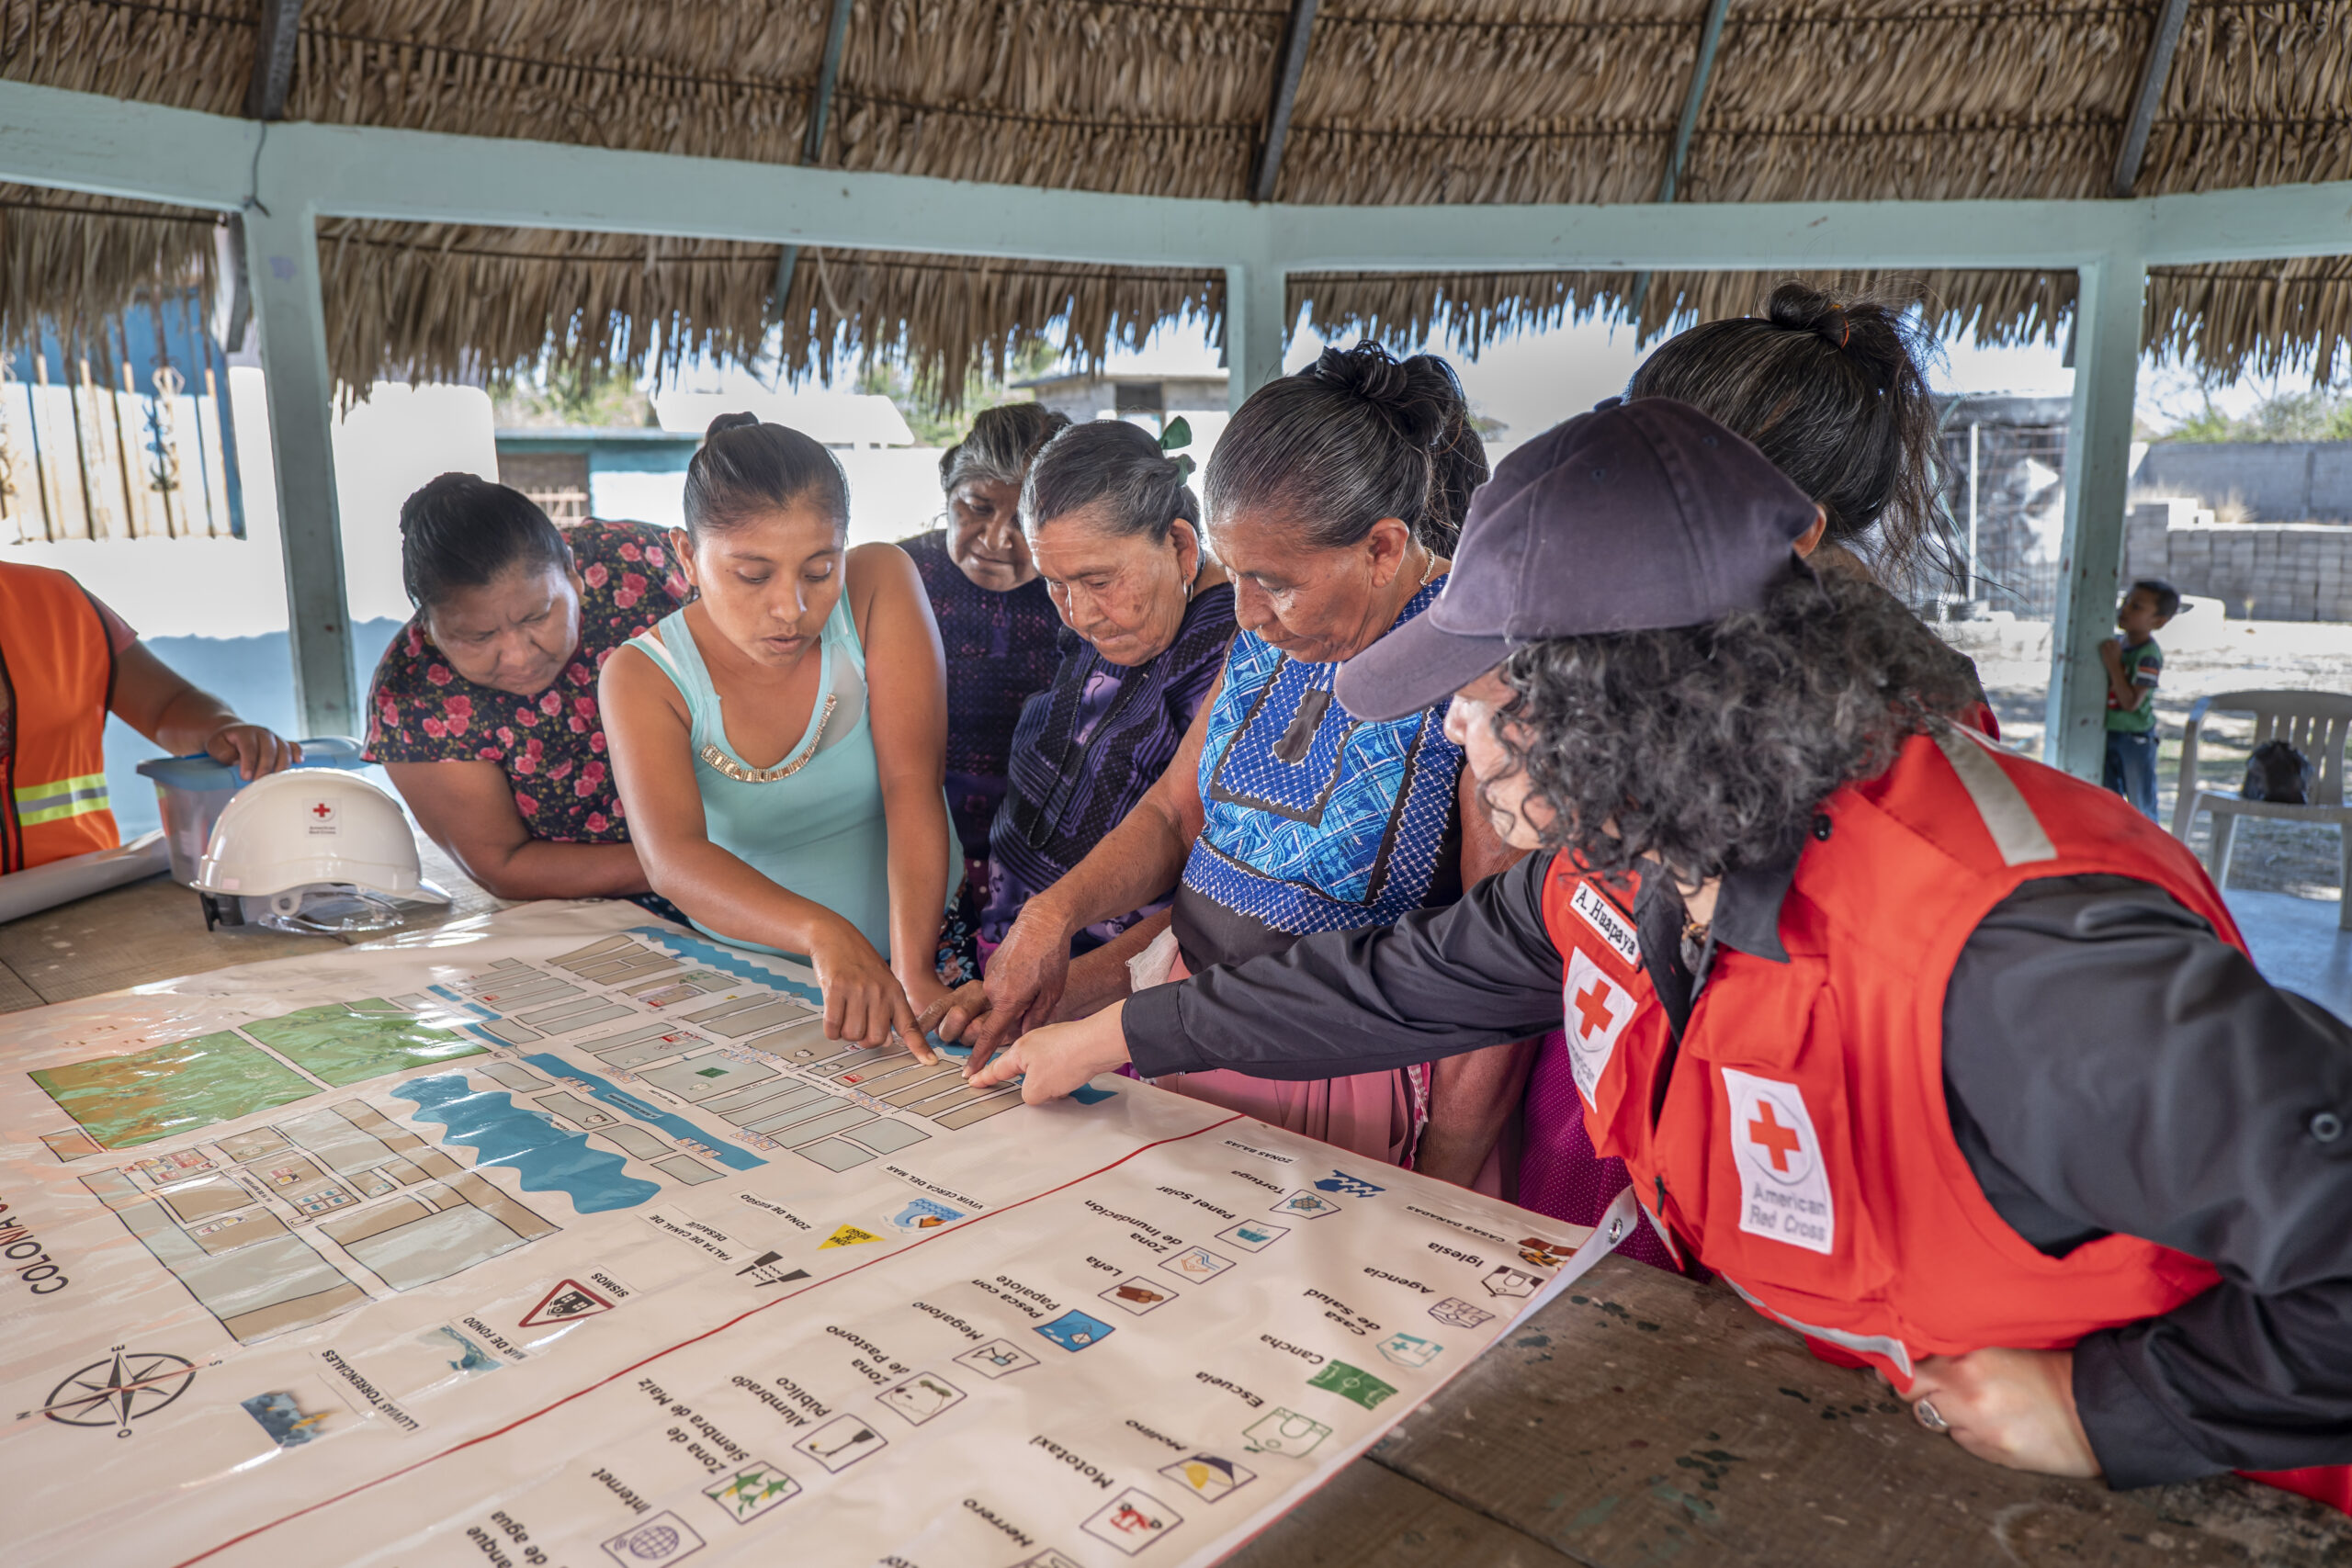 A volunteer wearing a Mexican red cross vest works with women translating the information in Ombeayuits, the local language. Four women from the community point at a risk map and learning escape routes.  